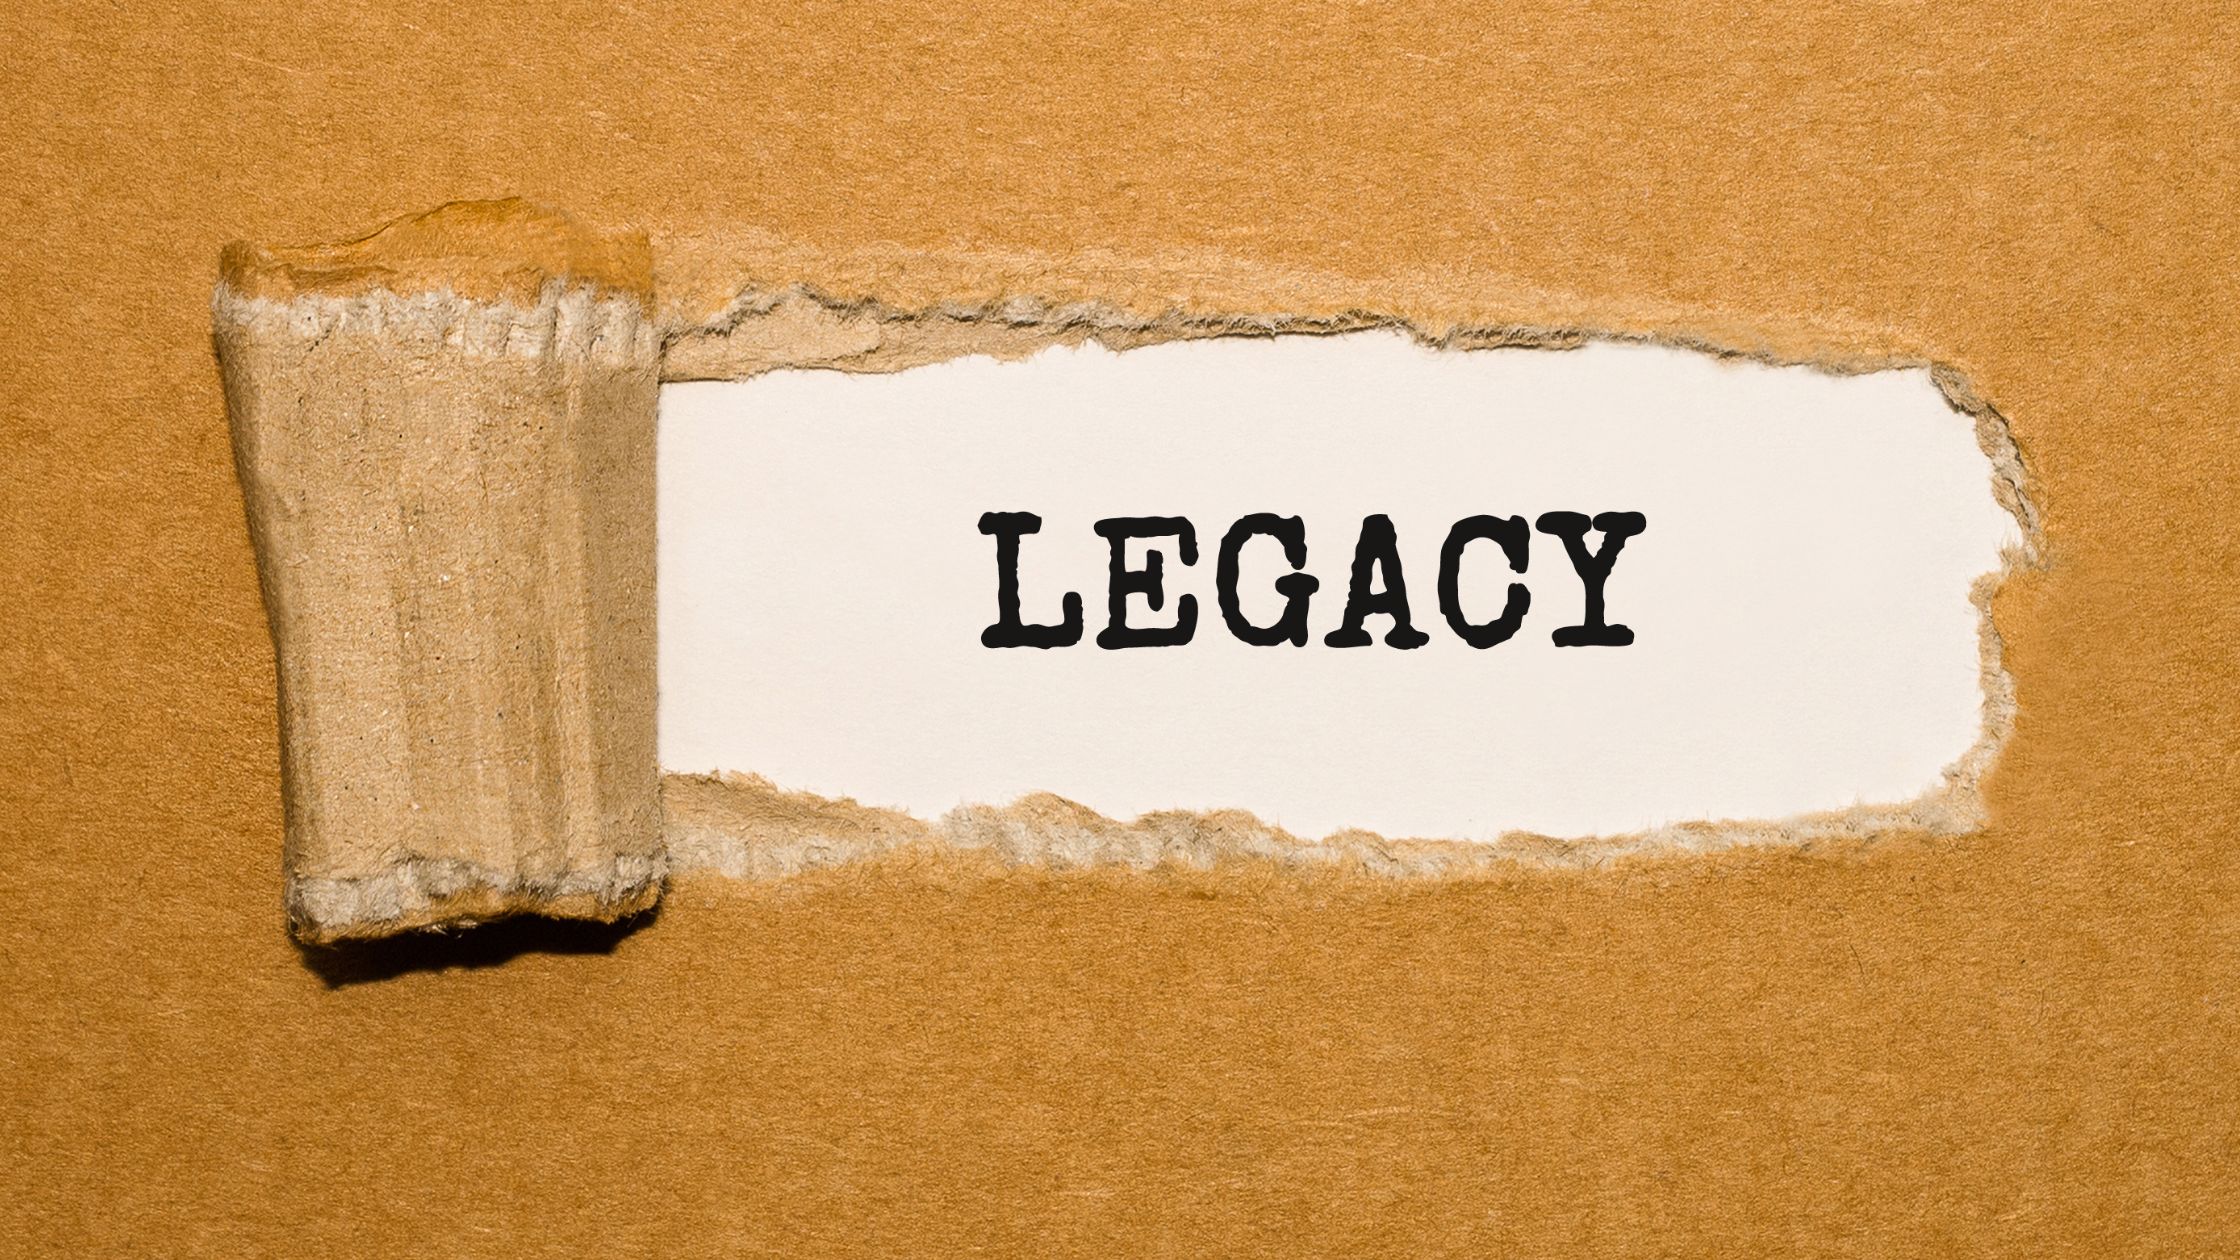 95-Year-Old Advice, Legacy, and What Do You Really Want?